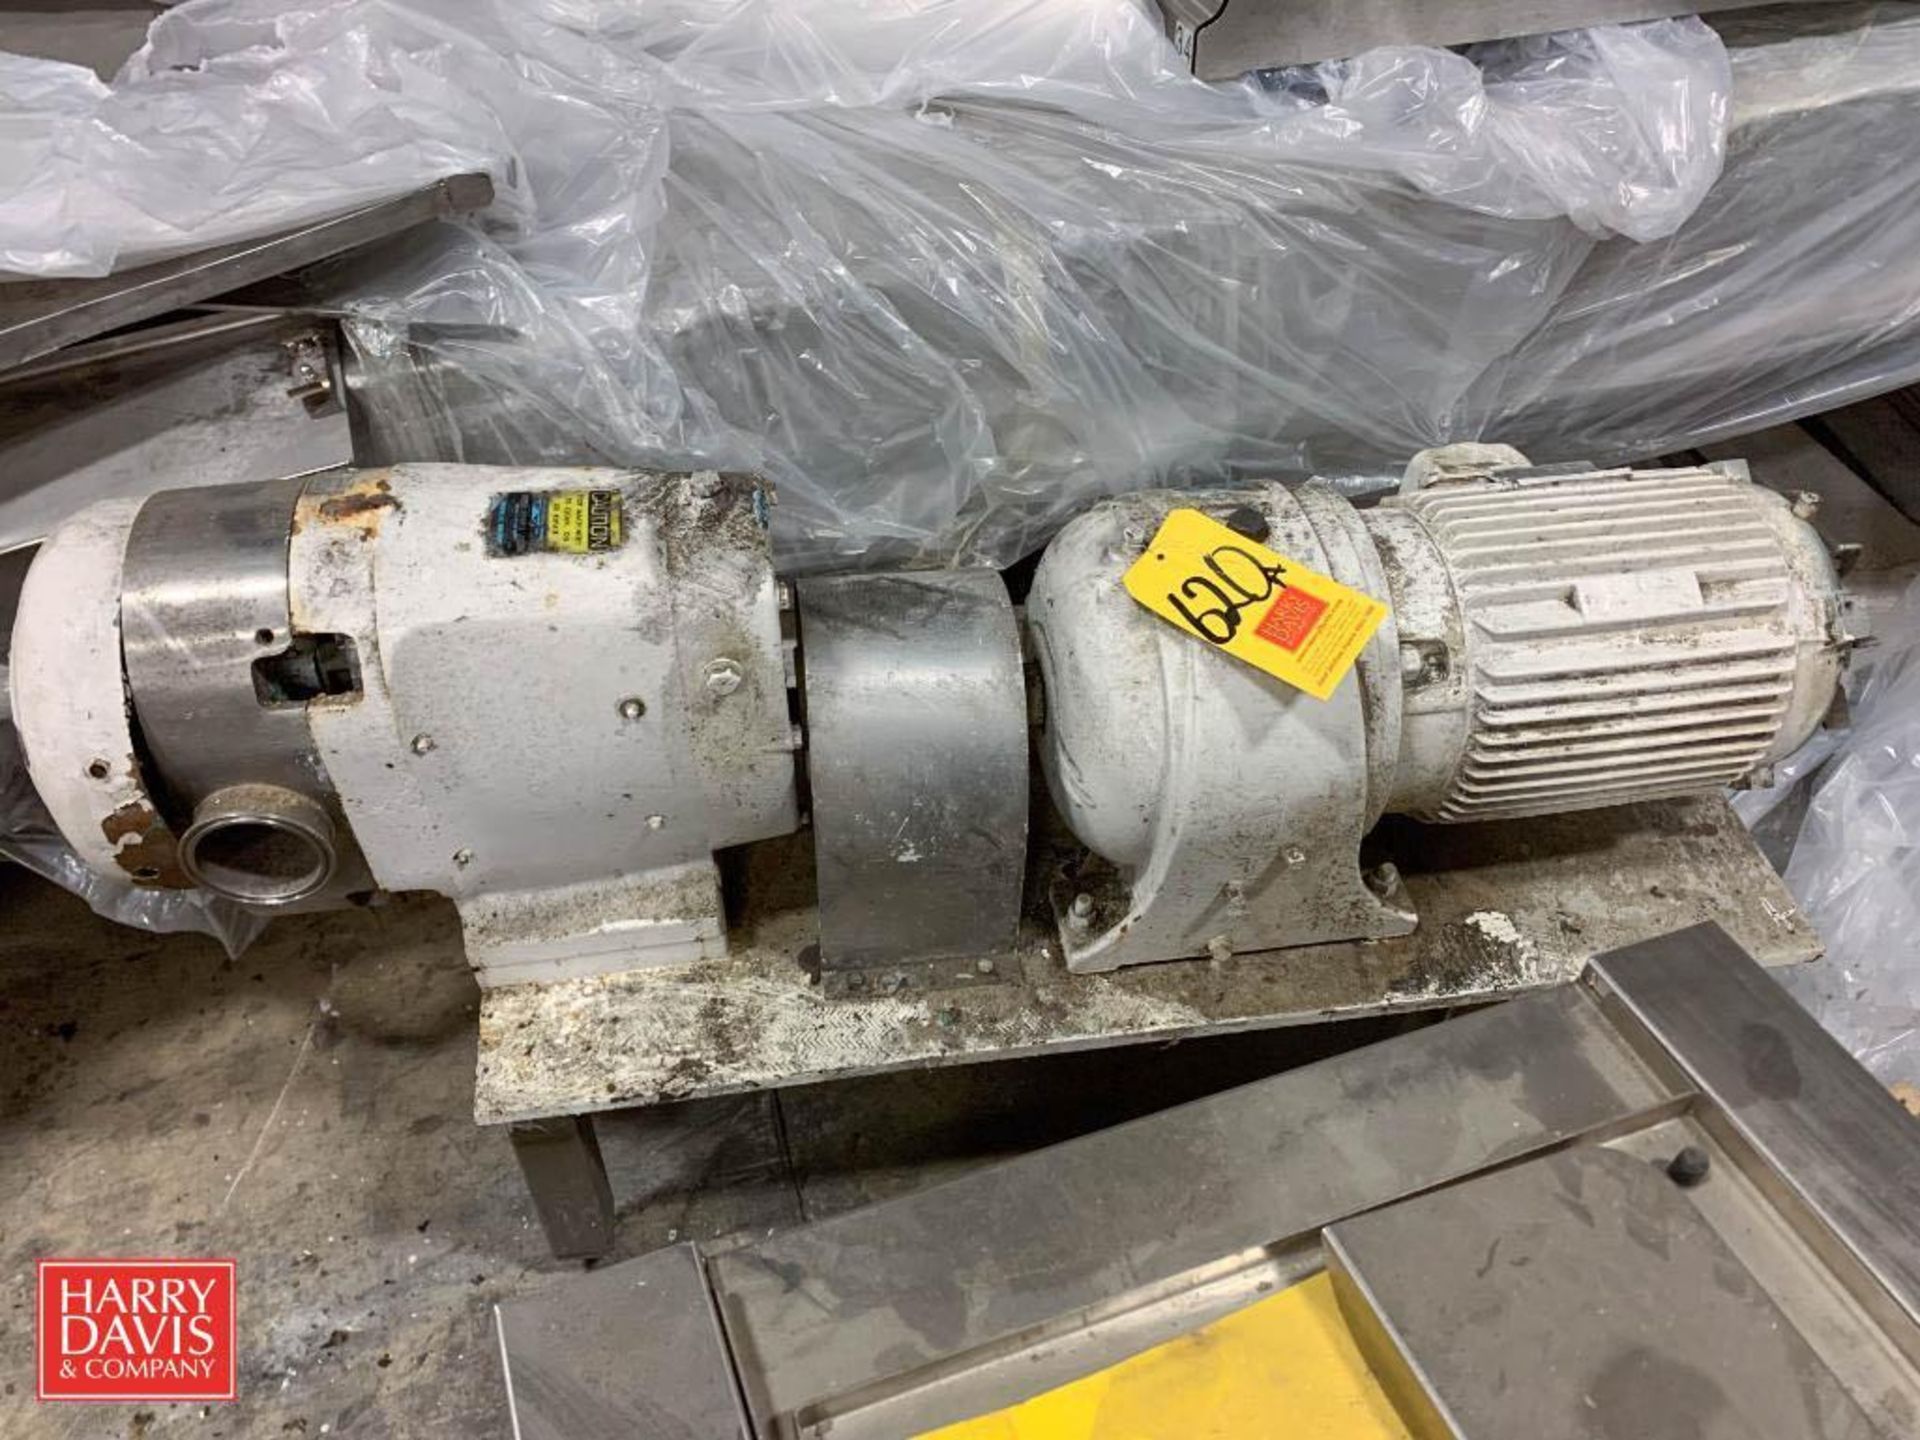 Waukesha Positive Displacement Pump, Size 130, S/N: 4114SS with 1,750 RPM Motor and Gear Reducing Dr